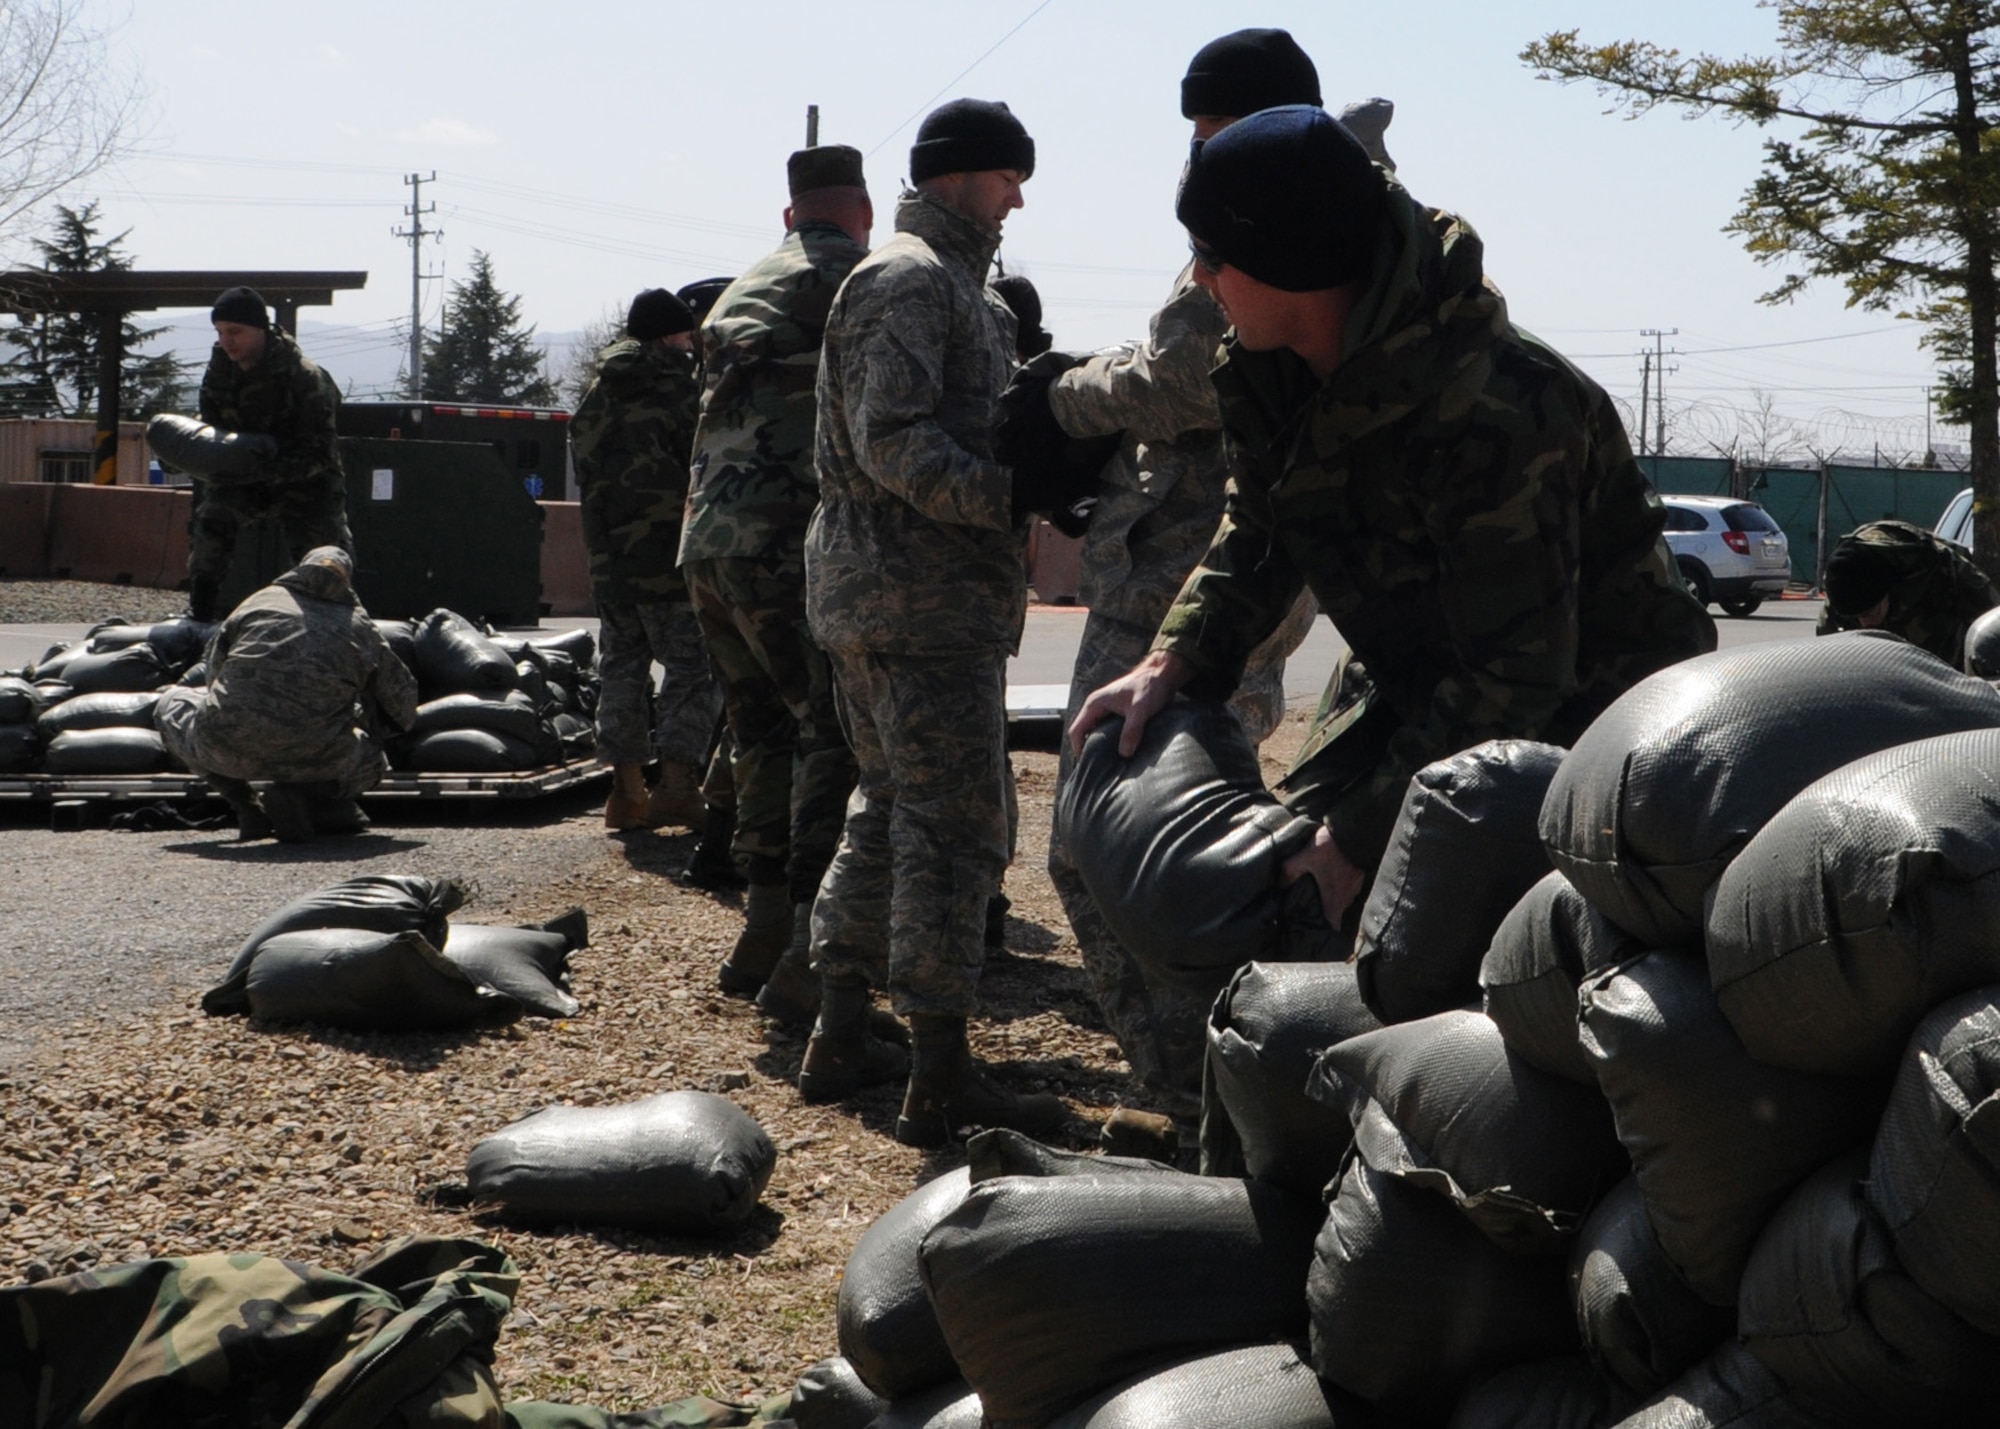 DAEGU AIR BASE, Republic of Korea -- Members of the 353rd Special Operations Group move sandbags to a pallet here March 14. The sandbags will be used for various purposes during the group's annual operational readiness exercise which affords unit members an opportunity to practice wartime skills necessary for their ability to survive and operate. The 353rd Special Operations Group is the focal point for all U.S. Air Force special operations activities throughout the U.S. Pacific Command theater. (U.S. Air Force photo by Tech. Sgt. Aaron Cram)
